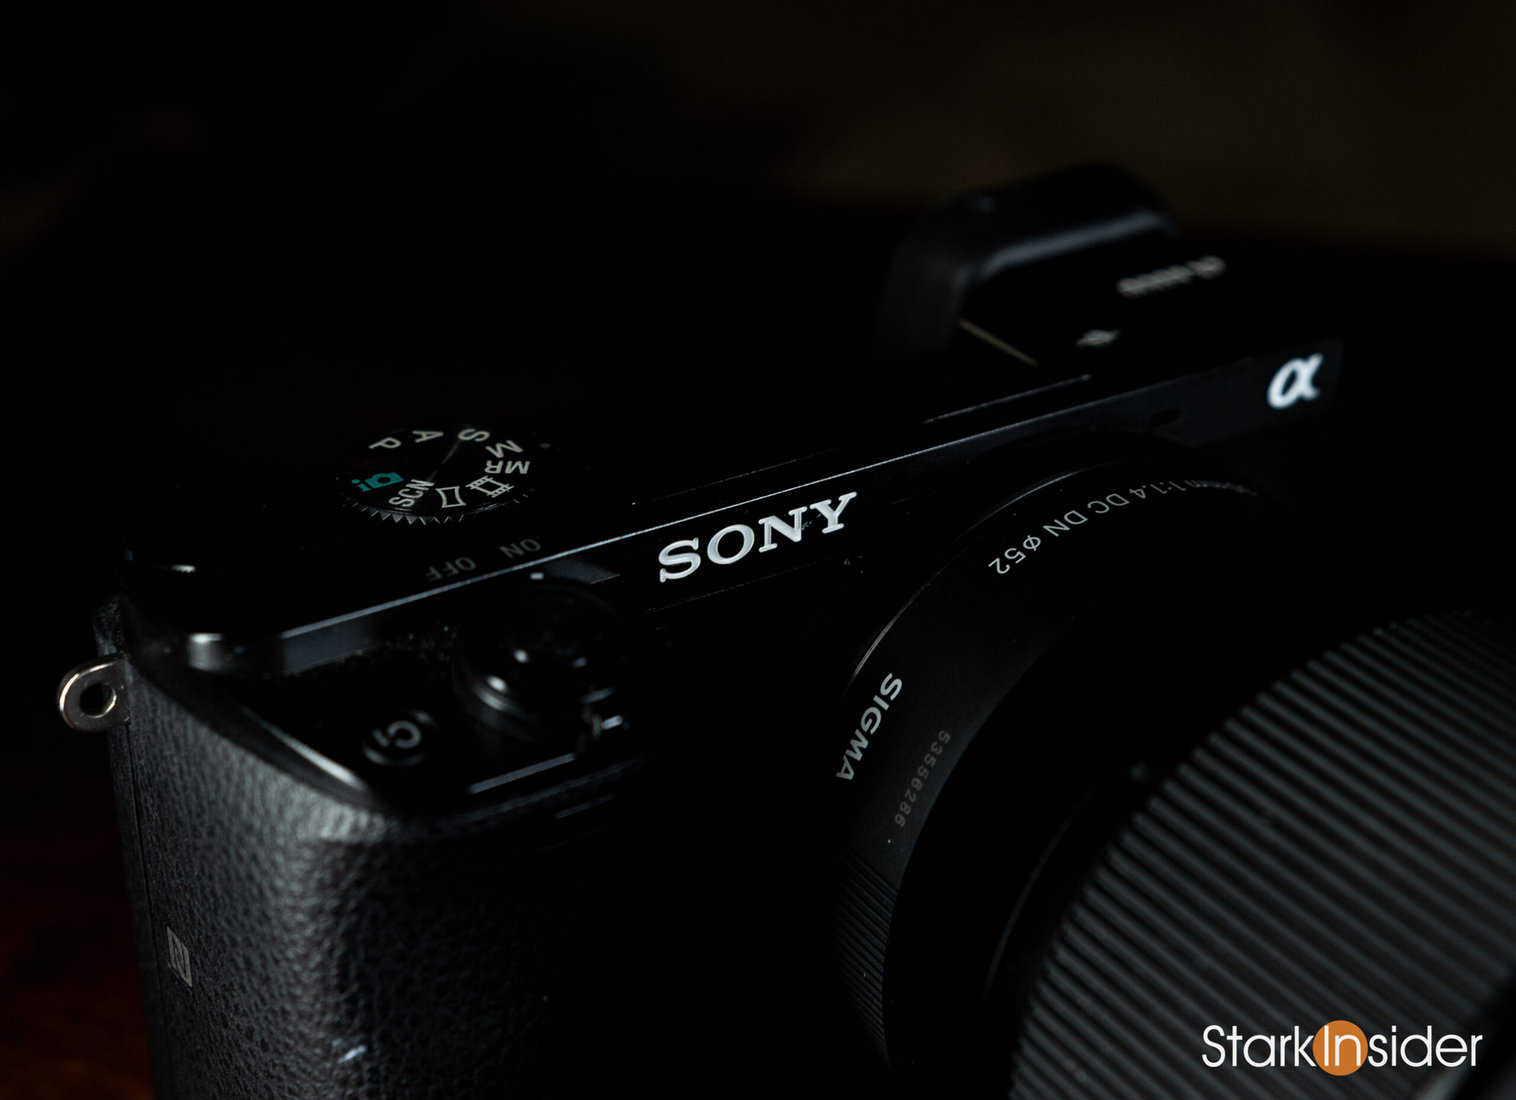 Sony a6000 Review - Is it The Best Travel Camera?